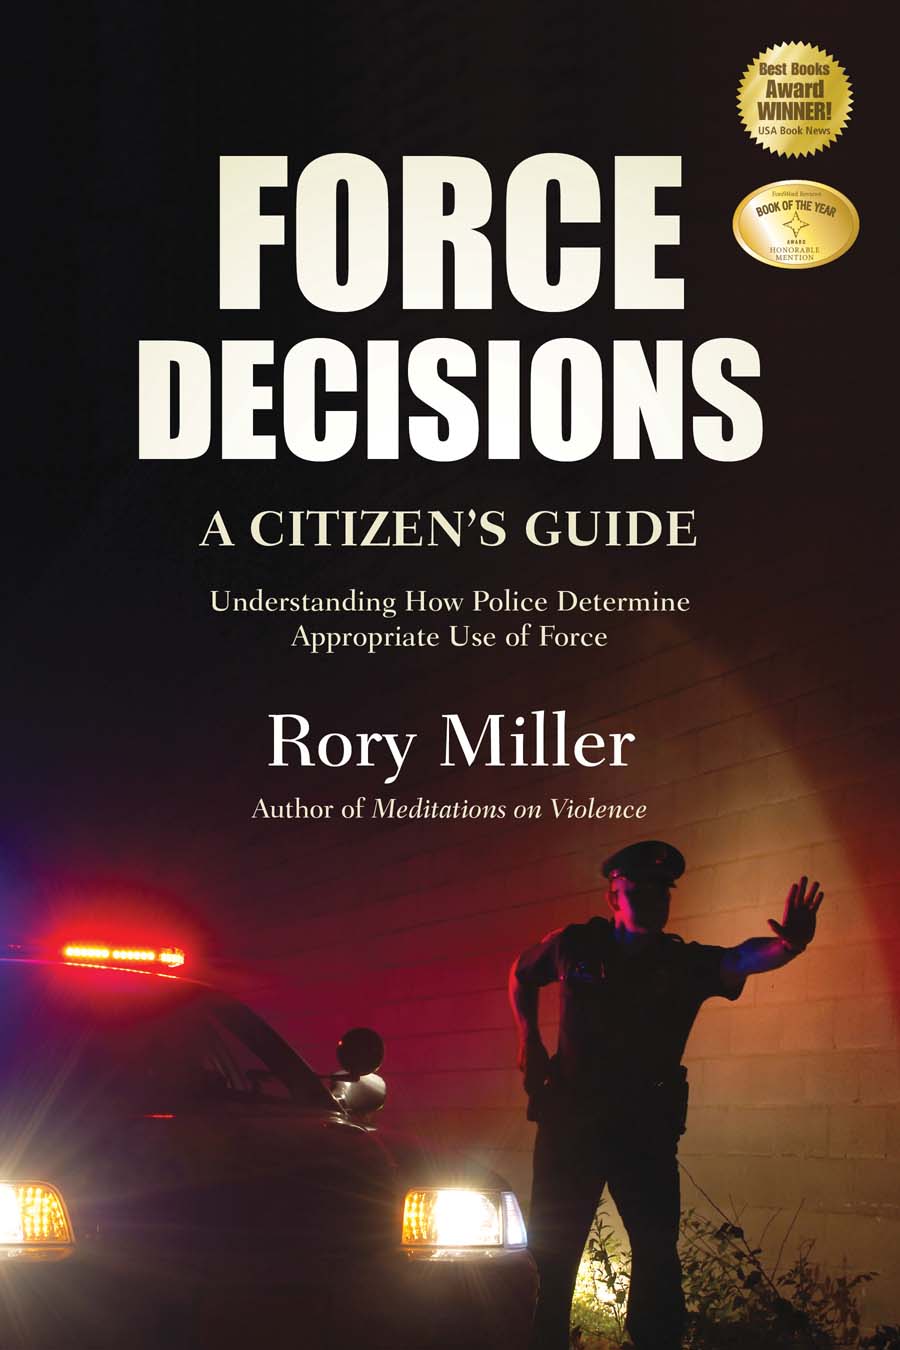 Force Decisions—A Citizen's Guide: Understanding How Police Determine Appropriate Use of Force Book by Rory Miller